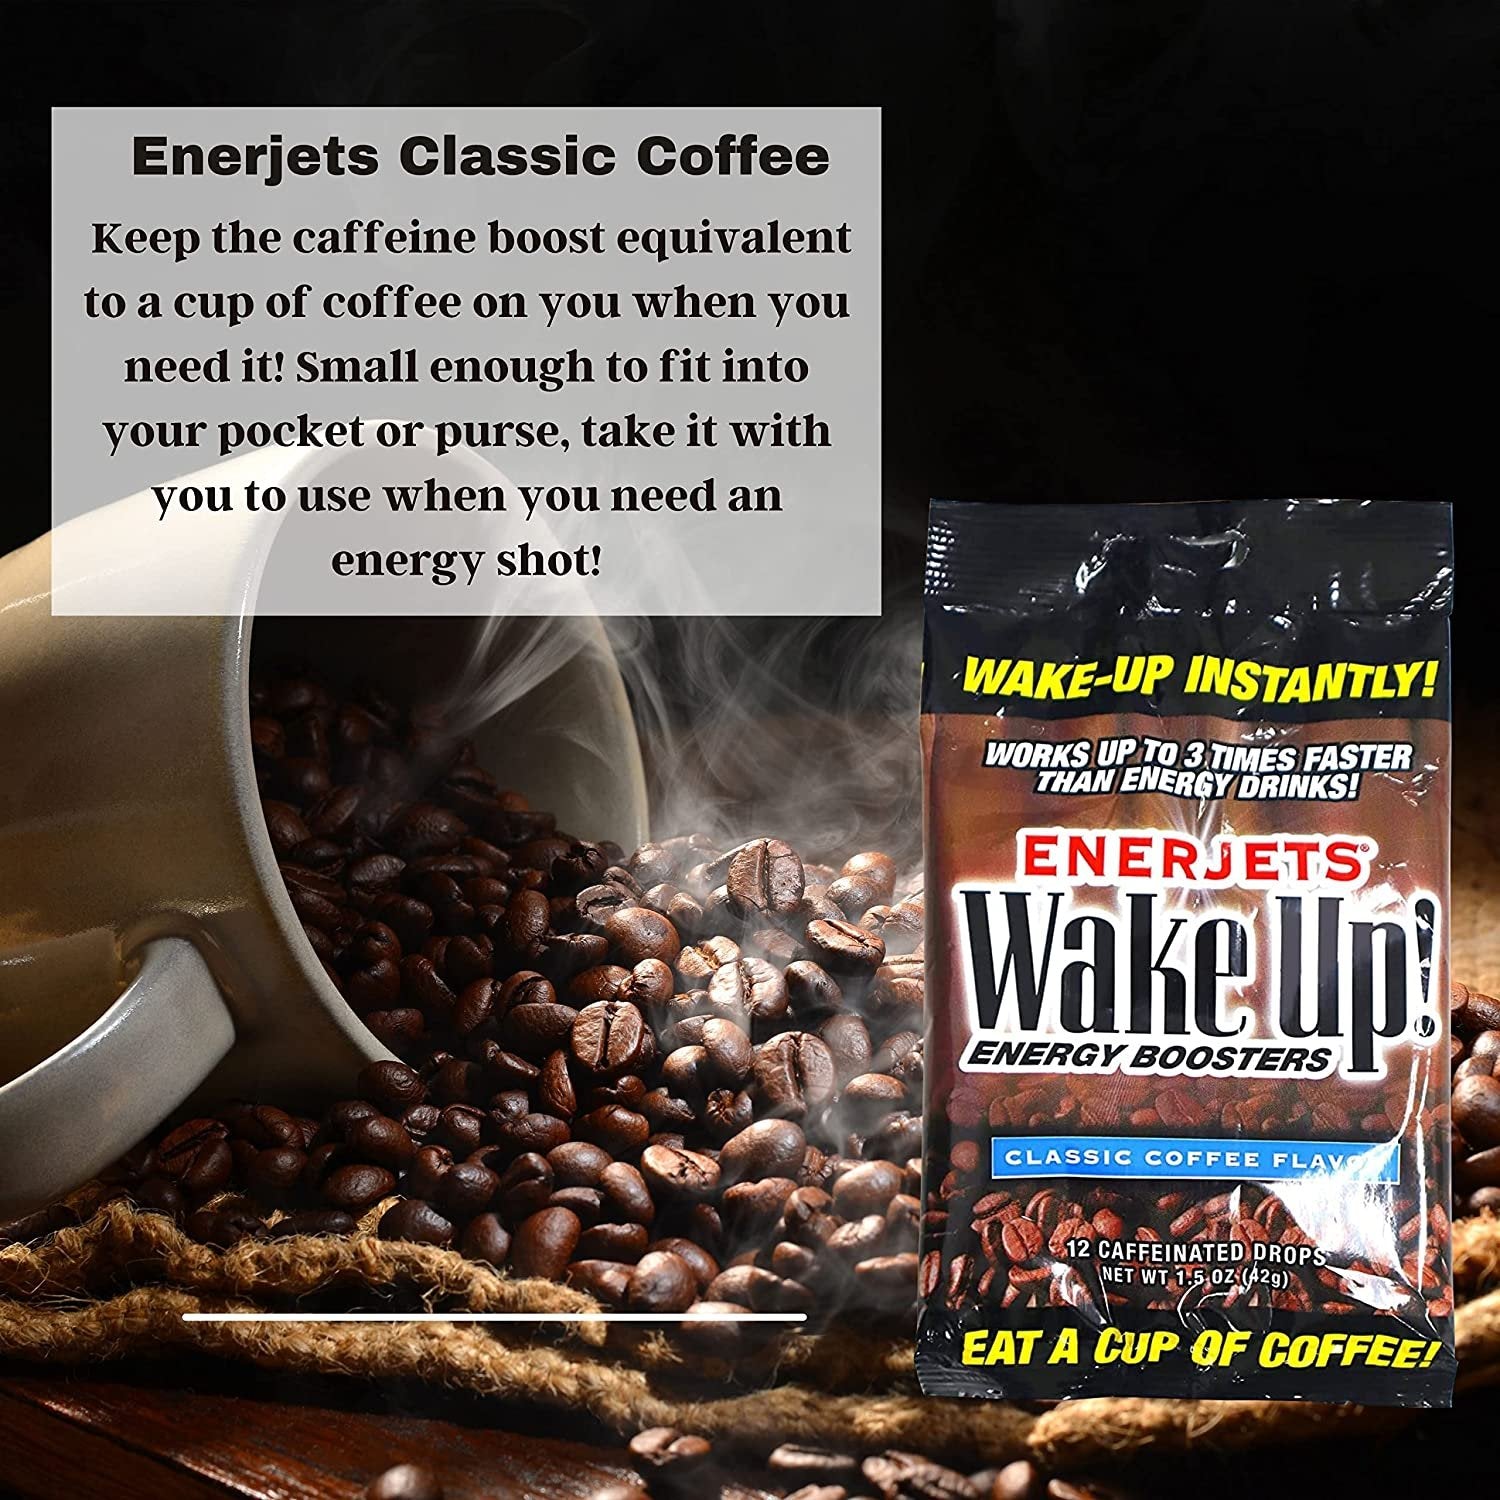 Worldwide Nutrition Enerjets Wake Up Energy Booster Caffeinated Drops - Instant Coffee Energy Supplements Classic Flavor Pack of 6, 12 Drops Per Package with Worldwide Multi Purpose Key Chain